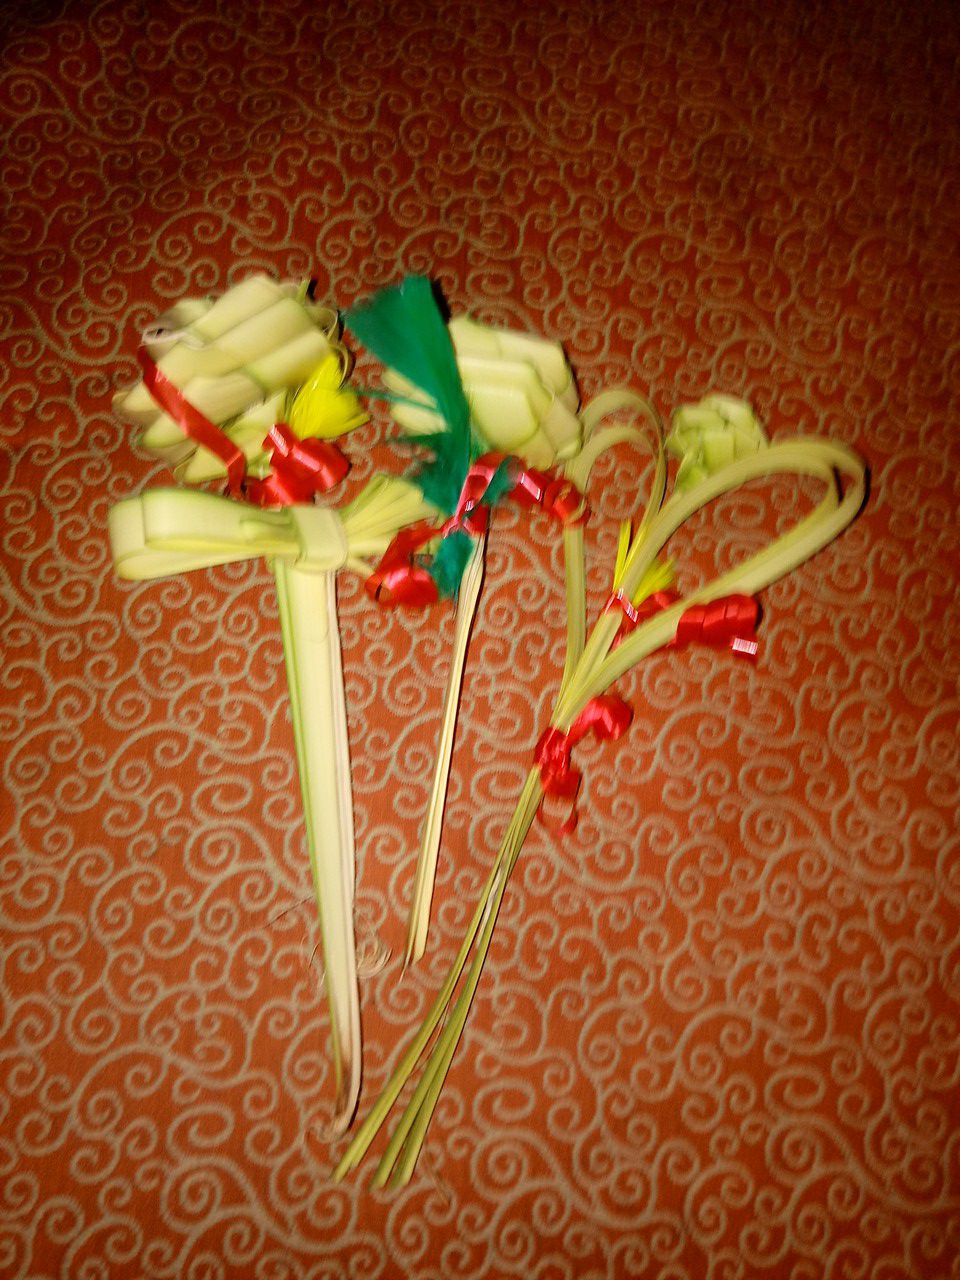 Gypsy made bamboo flowers